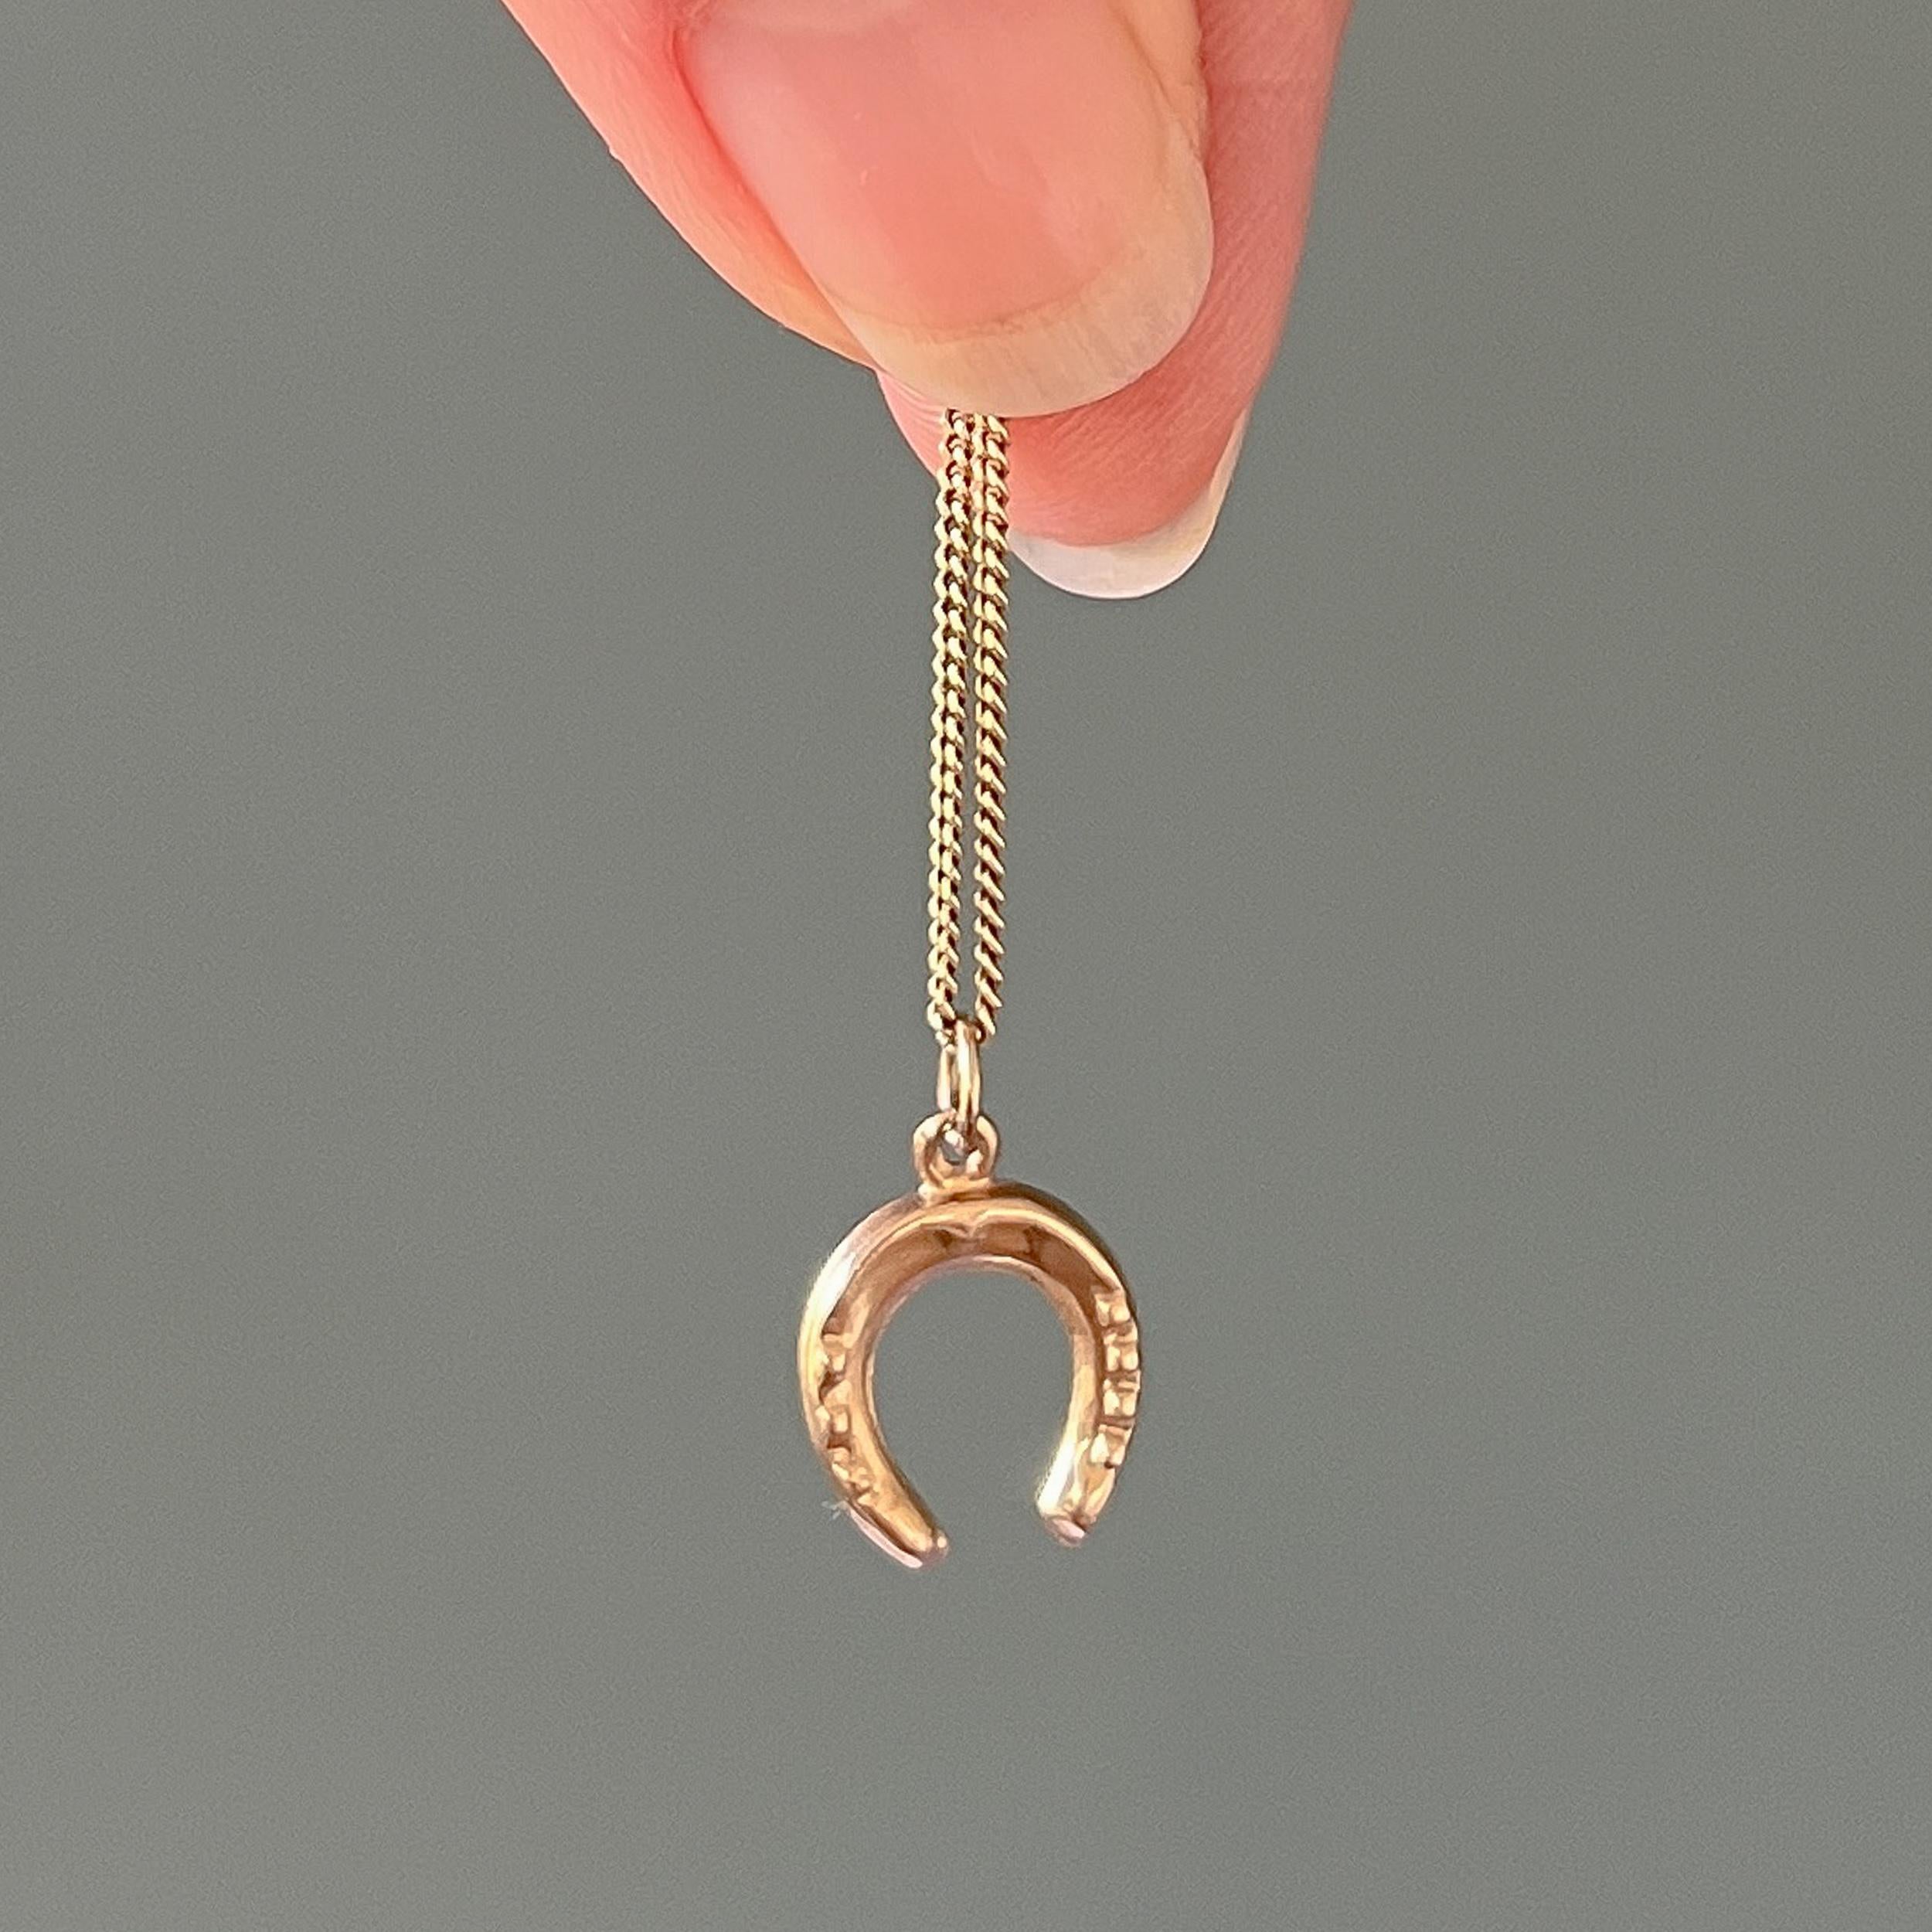 A vintage 9 karat yellow gold lucky horseshoe charm pendant. This miniature horseshoe charm is nicely detailed. The horseshoe is universally known as a symbol of protection and good luck. The amalgamation of luck, protection and religion have made